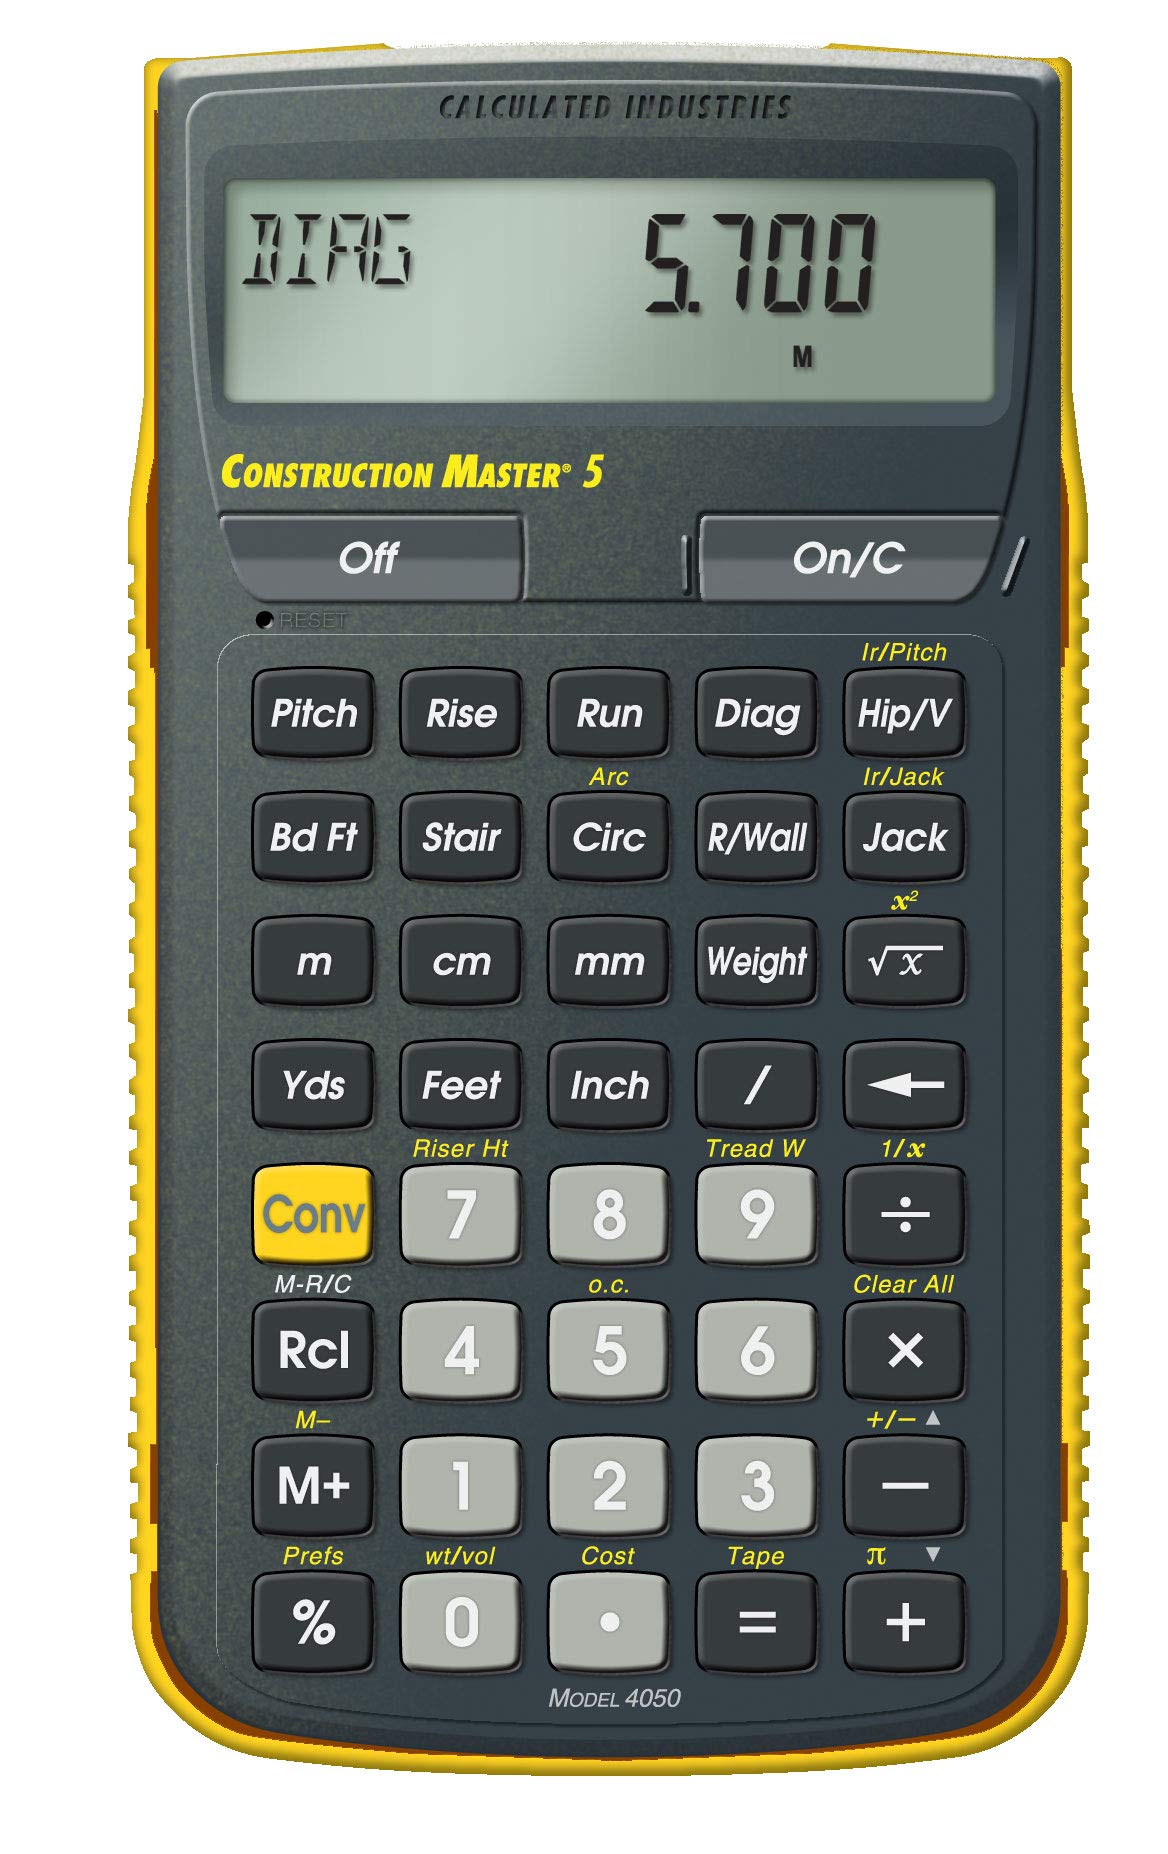 Calculated Industries 4050 Construction Master 5 Constr...